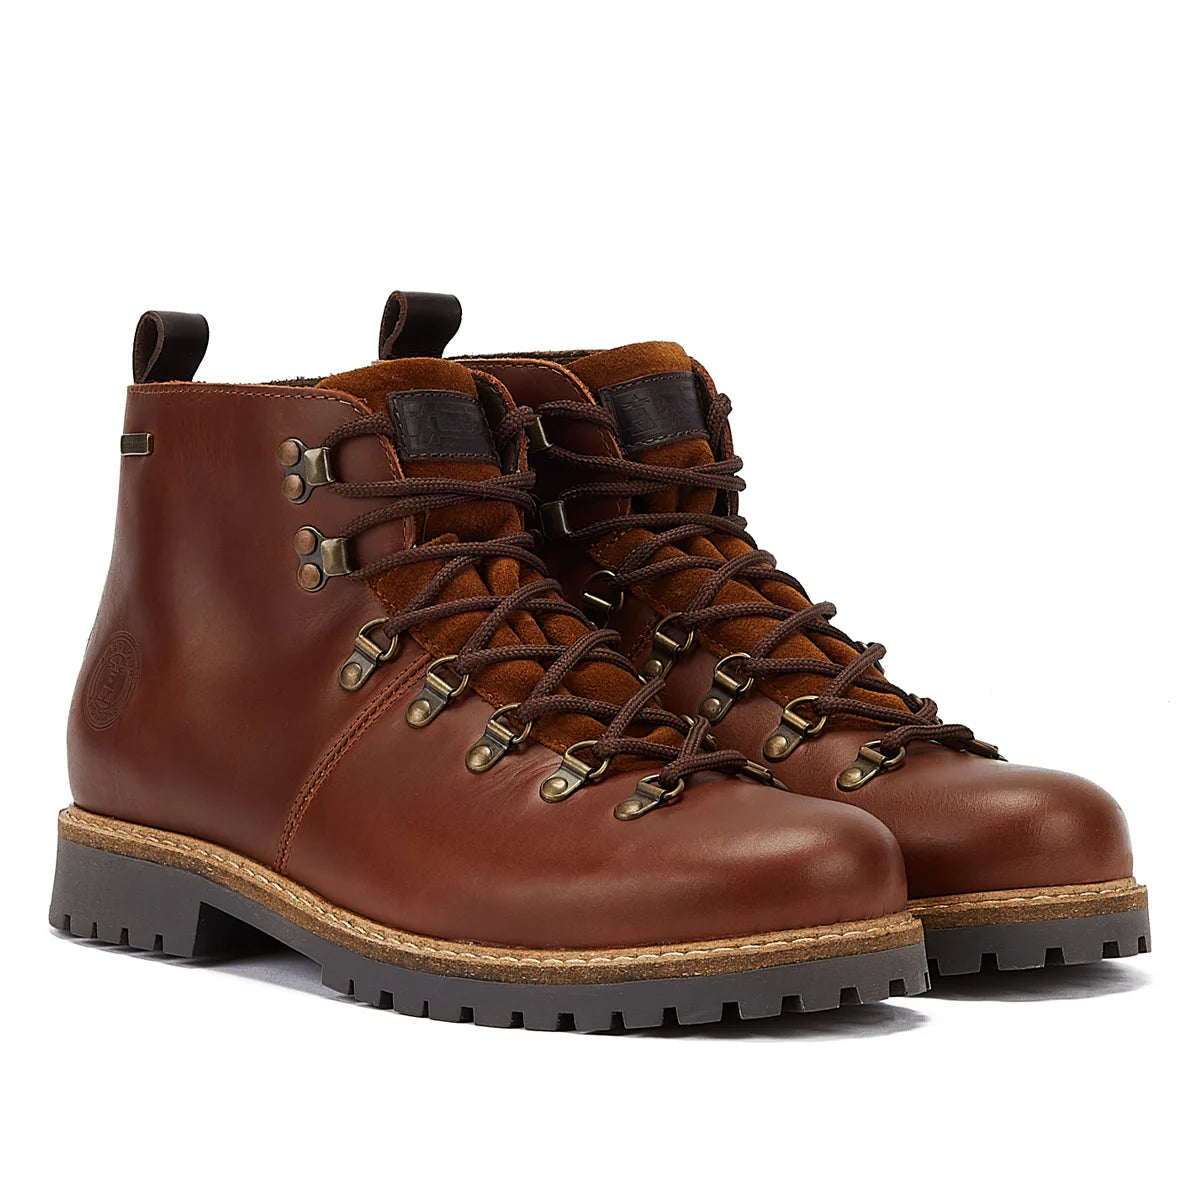 Barbour Wainwright Chestnut Men’s Brown Boots